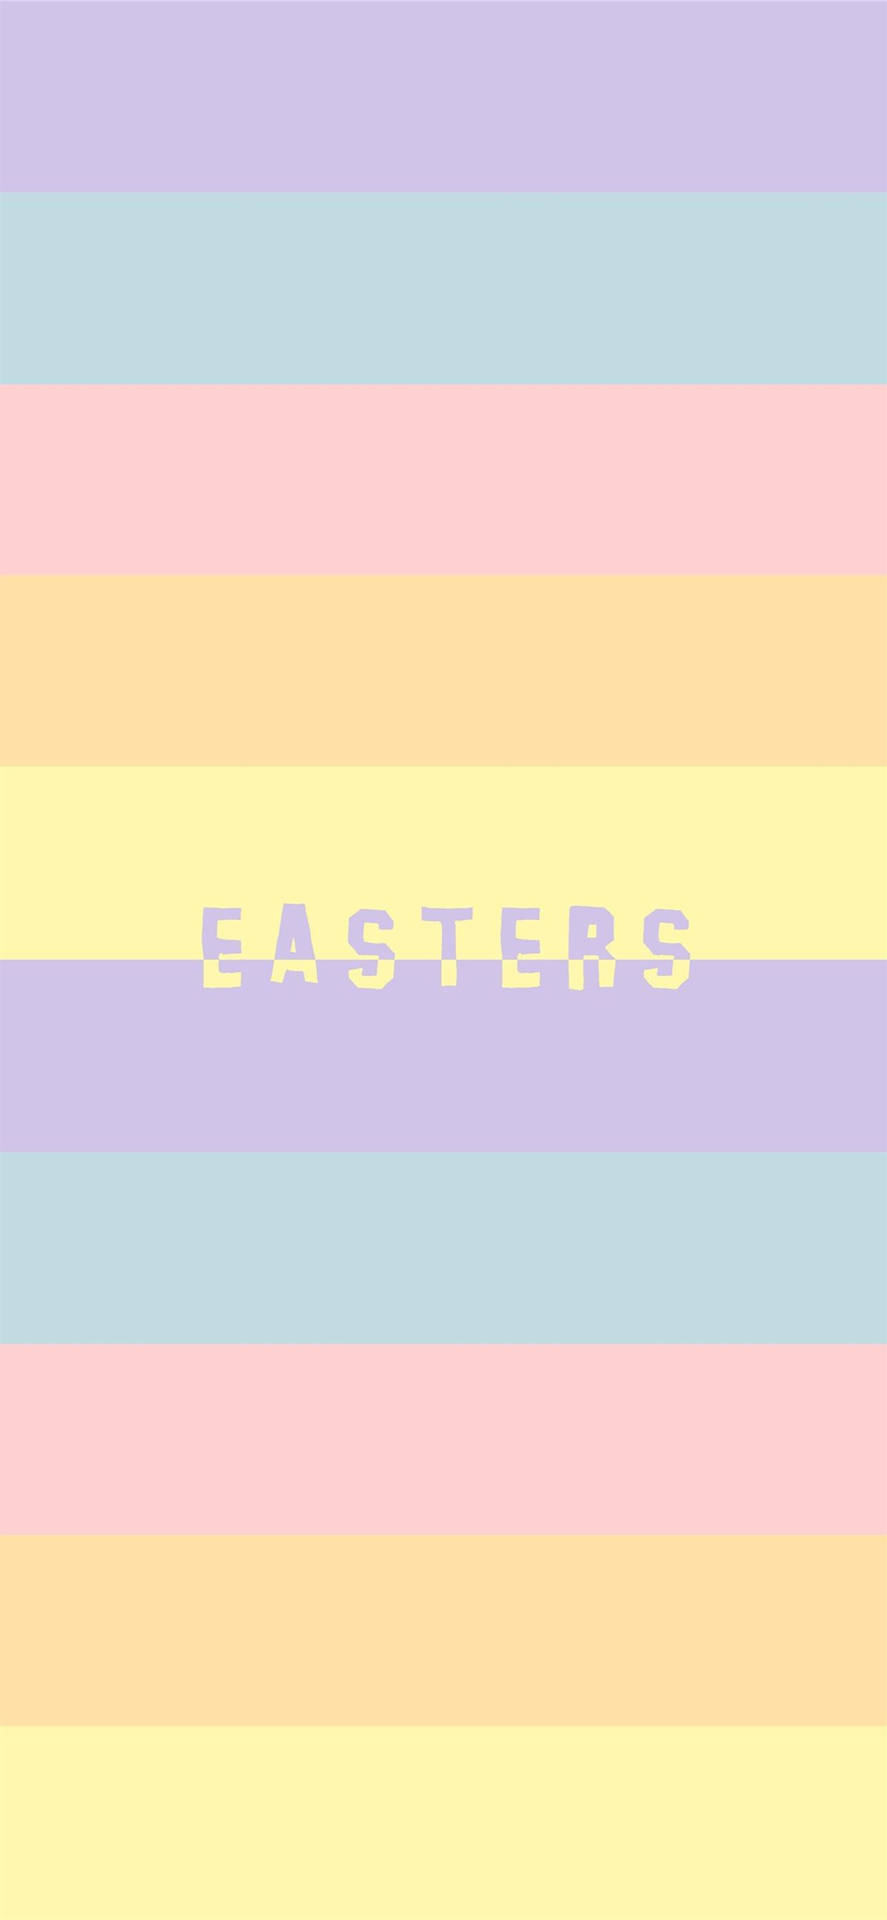 Celebrate Easter with Aesthetic Joy Wallpaper